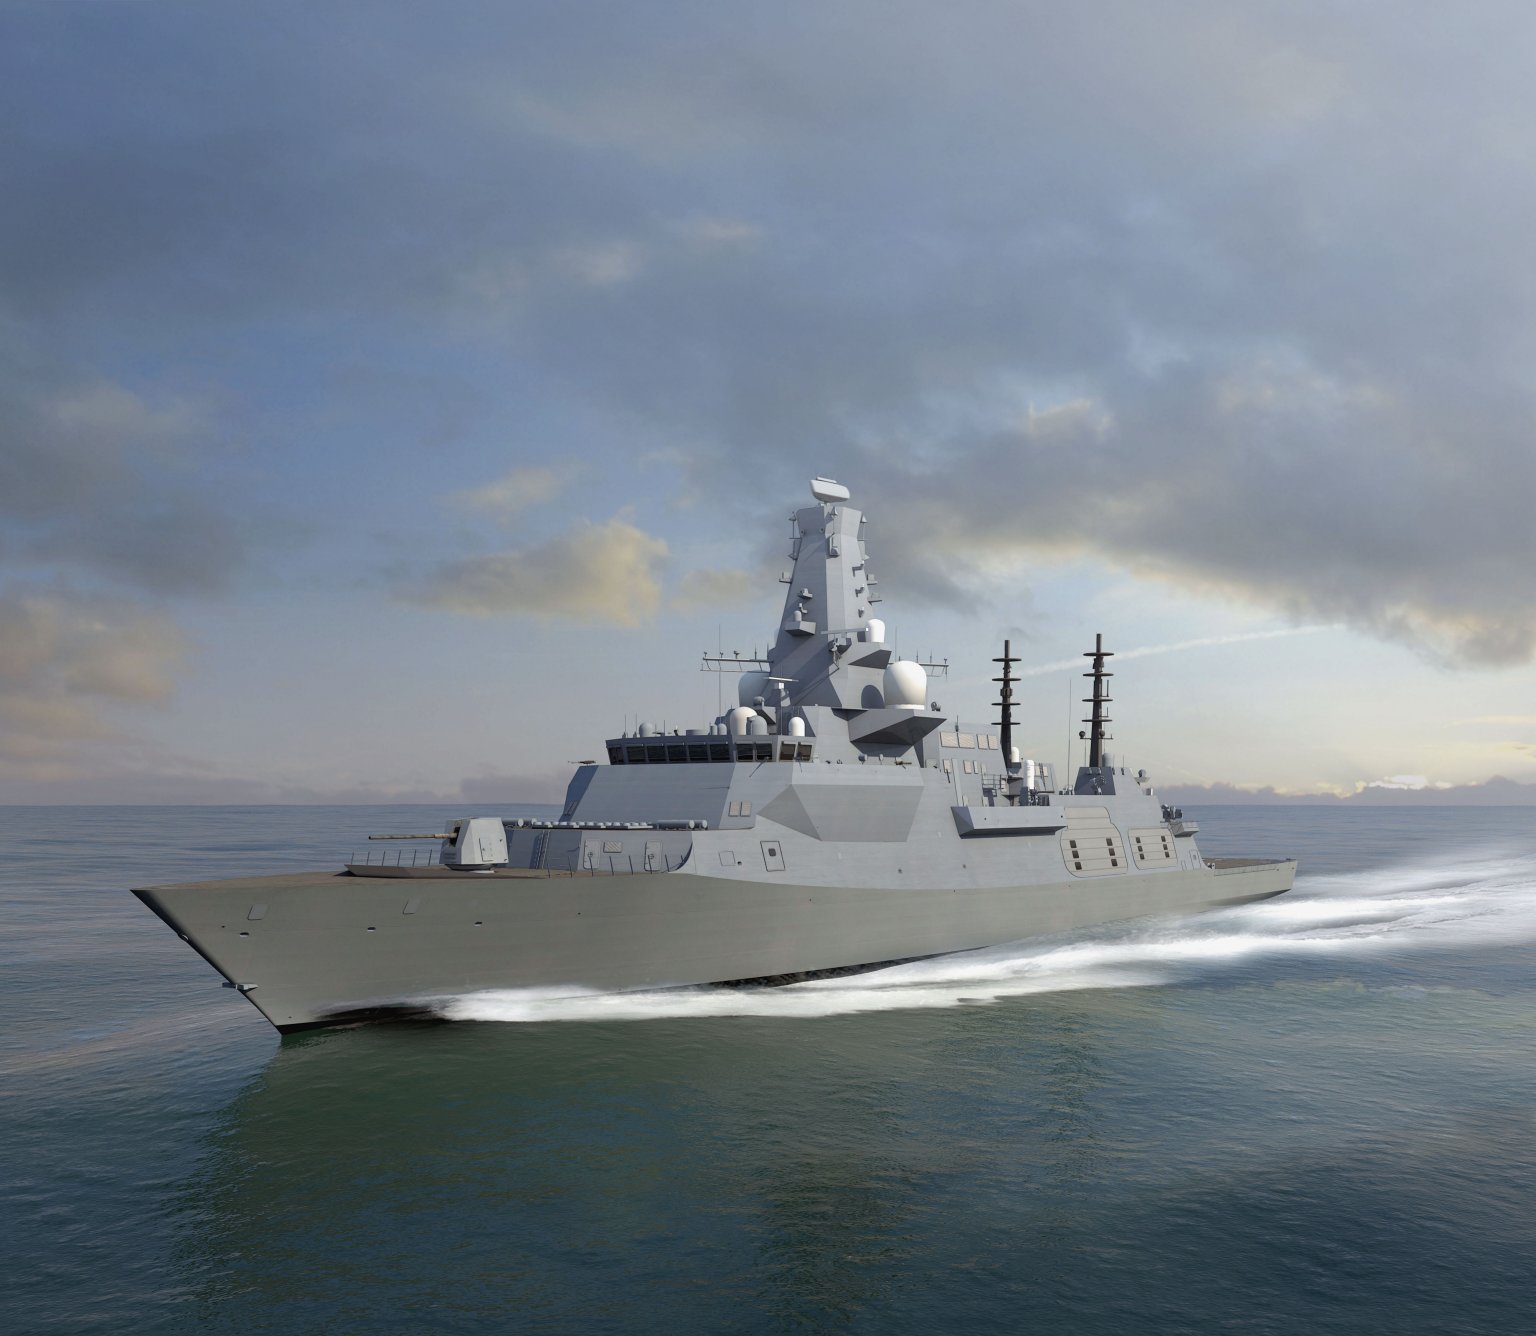 The UK’s current shipbuilding plan includes eight Type 26 frigates (pictured), five Type 31 frigates, and a projected follow-on Type 32 general-purpose frigate. (BAE Systems)